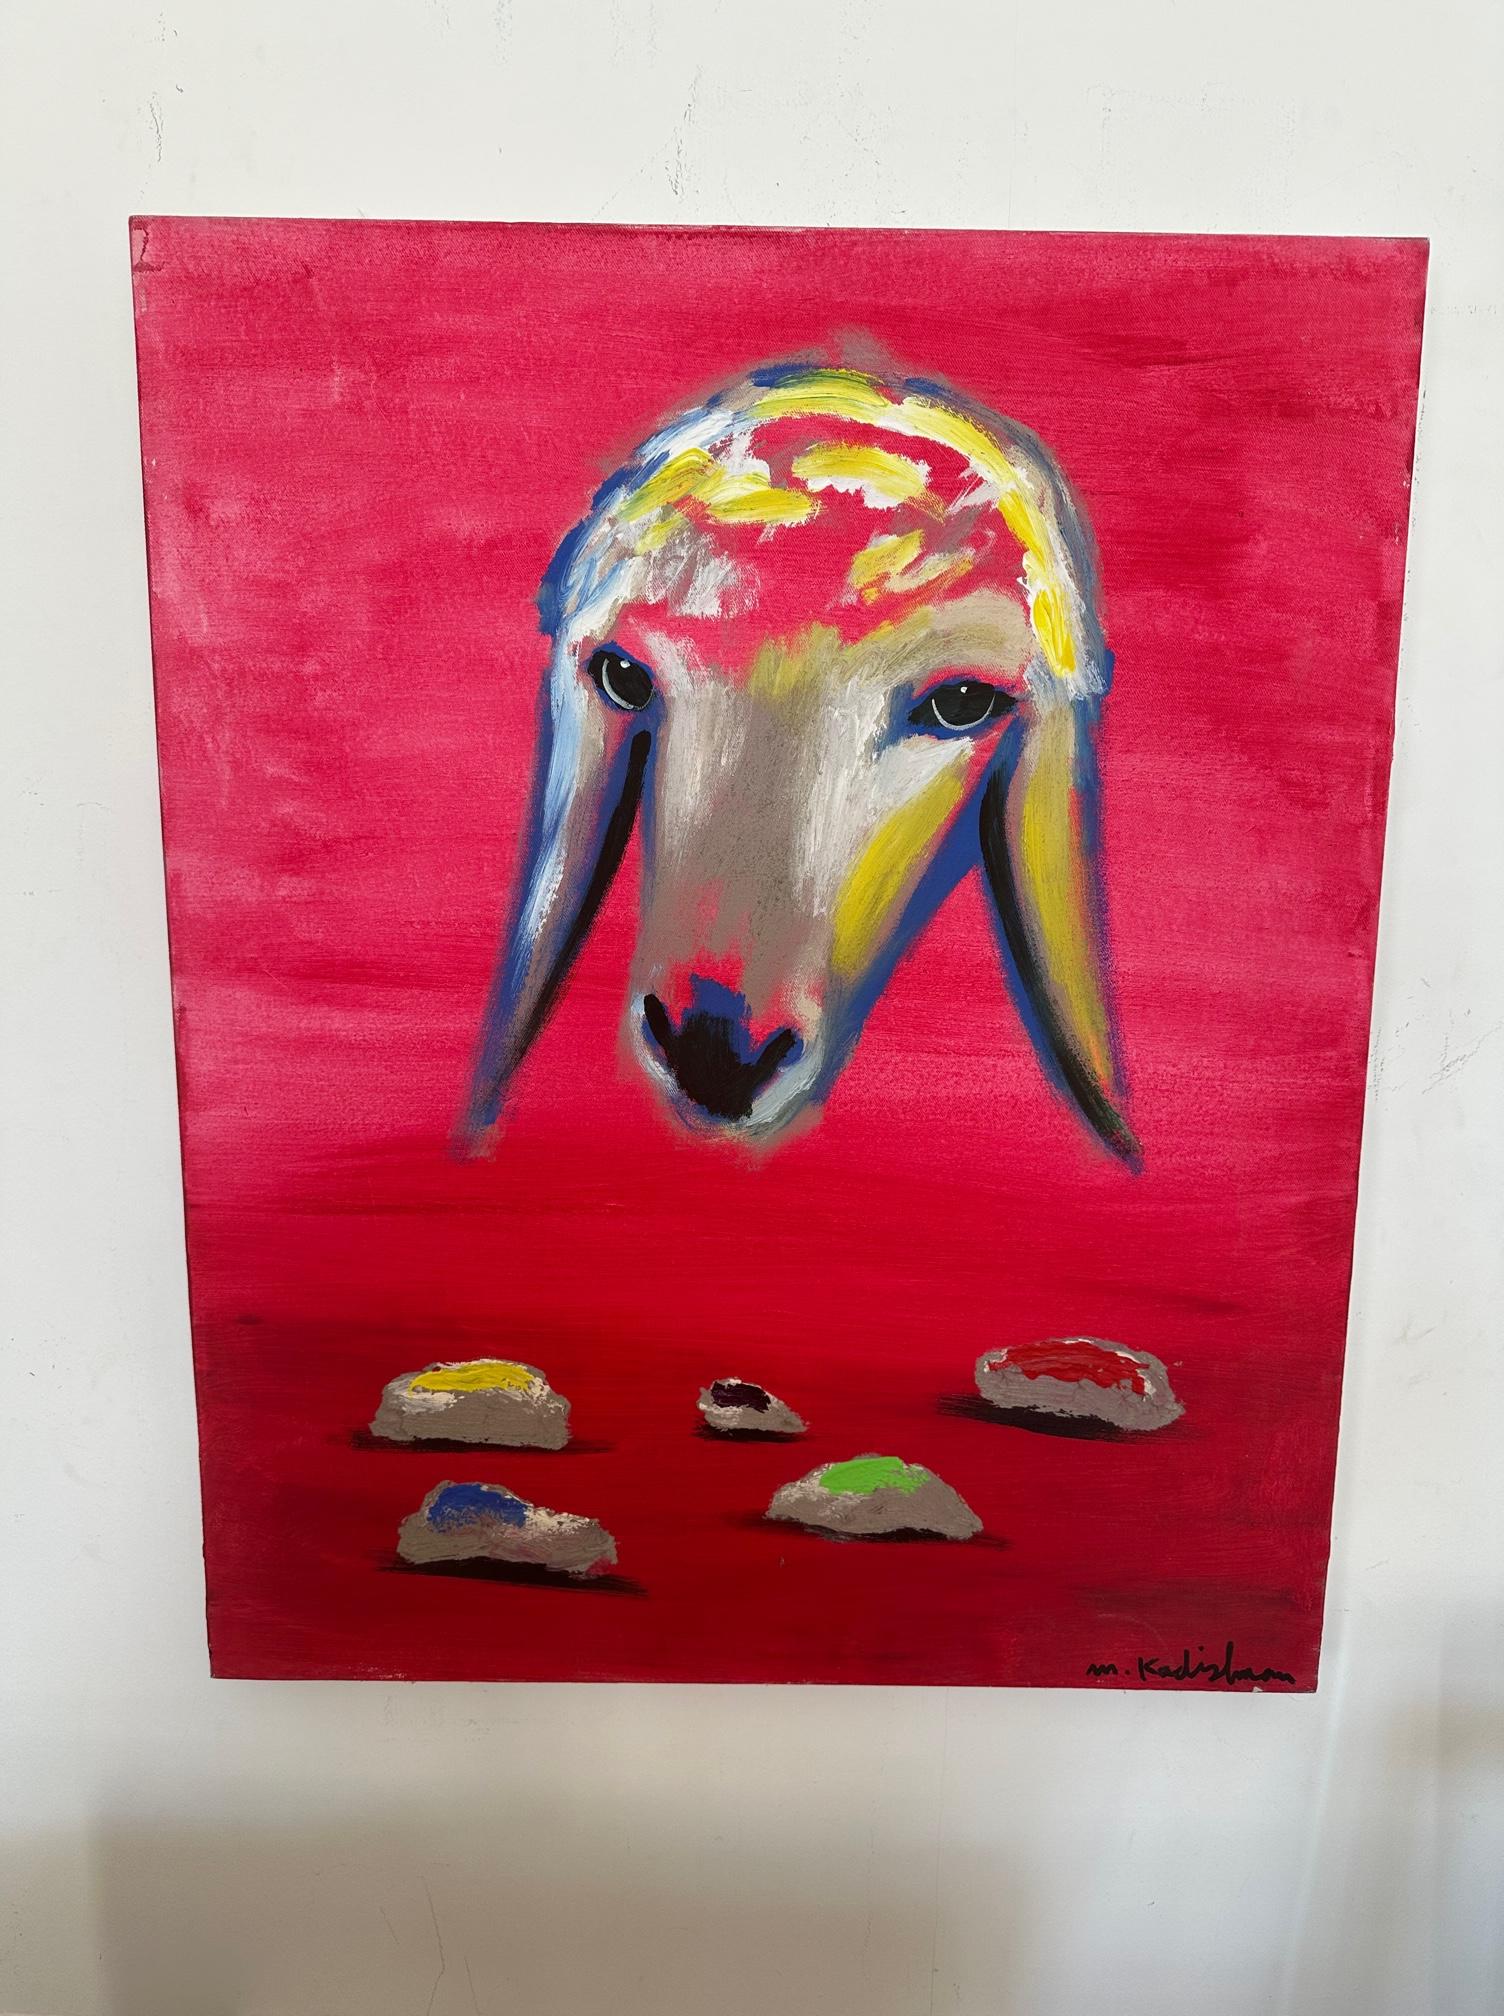 Beautiful painting, colorful and vibrant RED sheep head by Kadishman For Sale 1